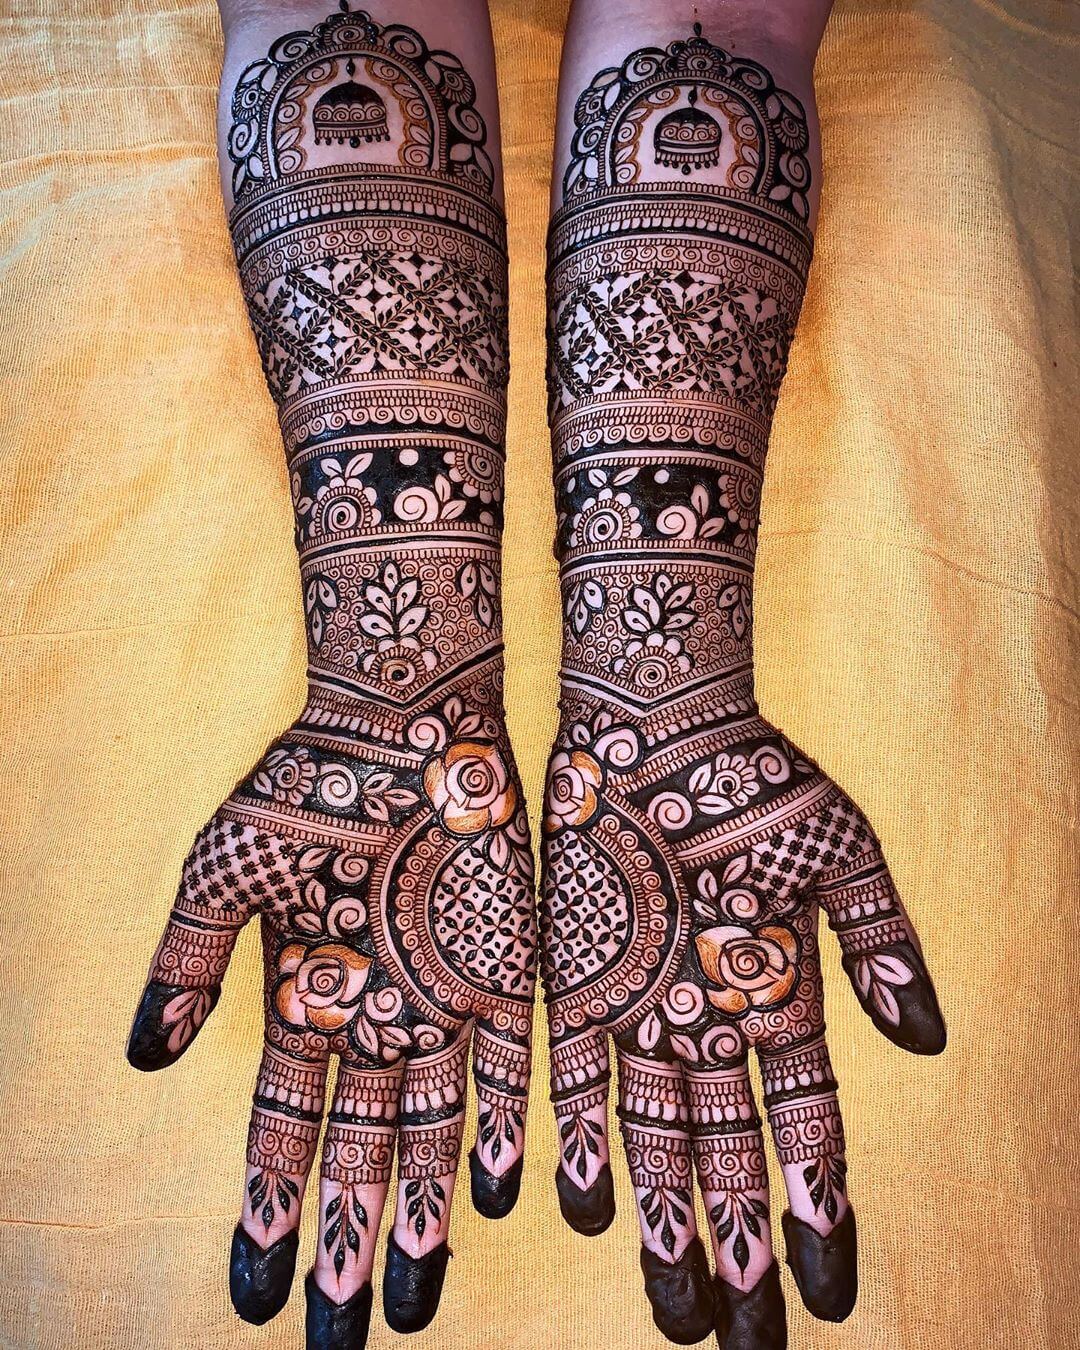 Intricate designs to adorn the bride's hands with.